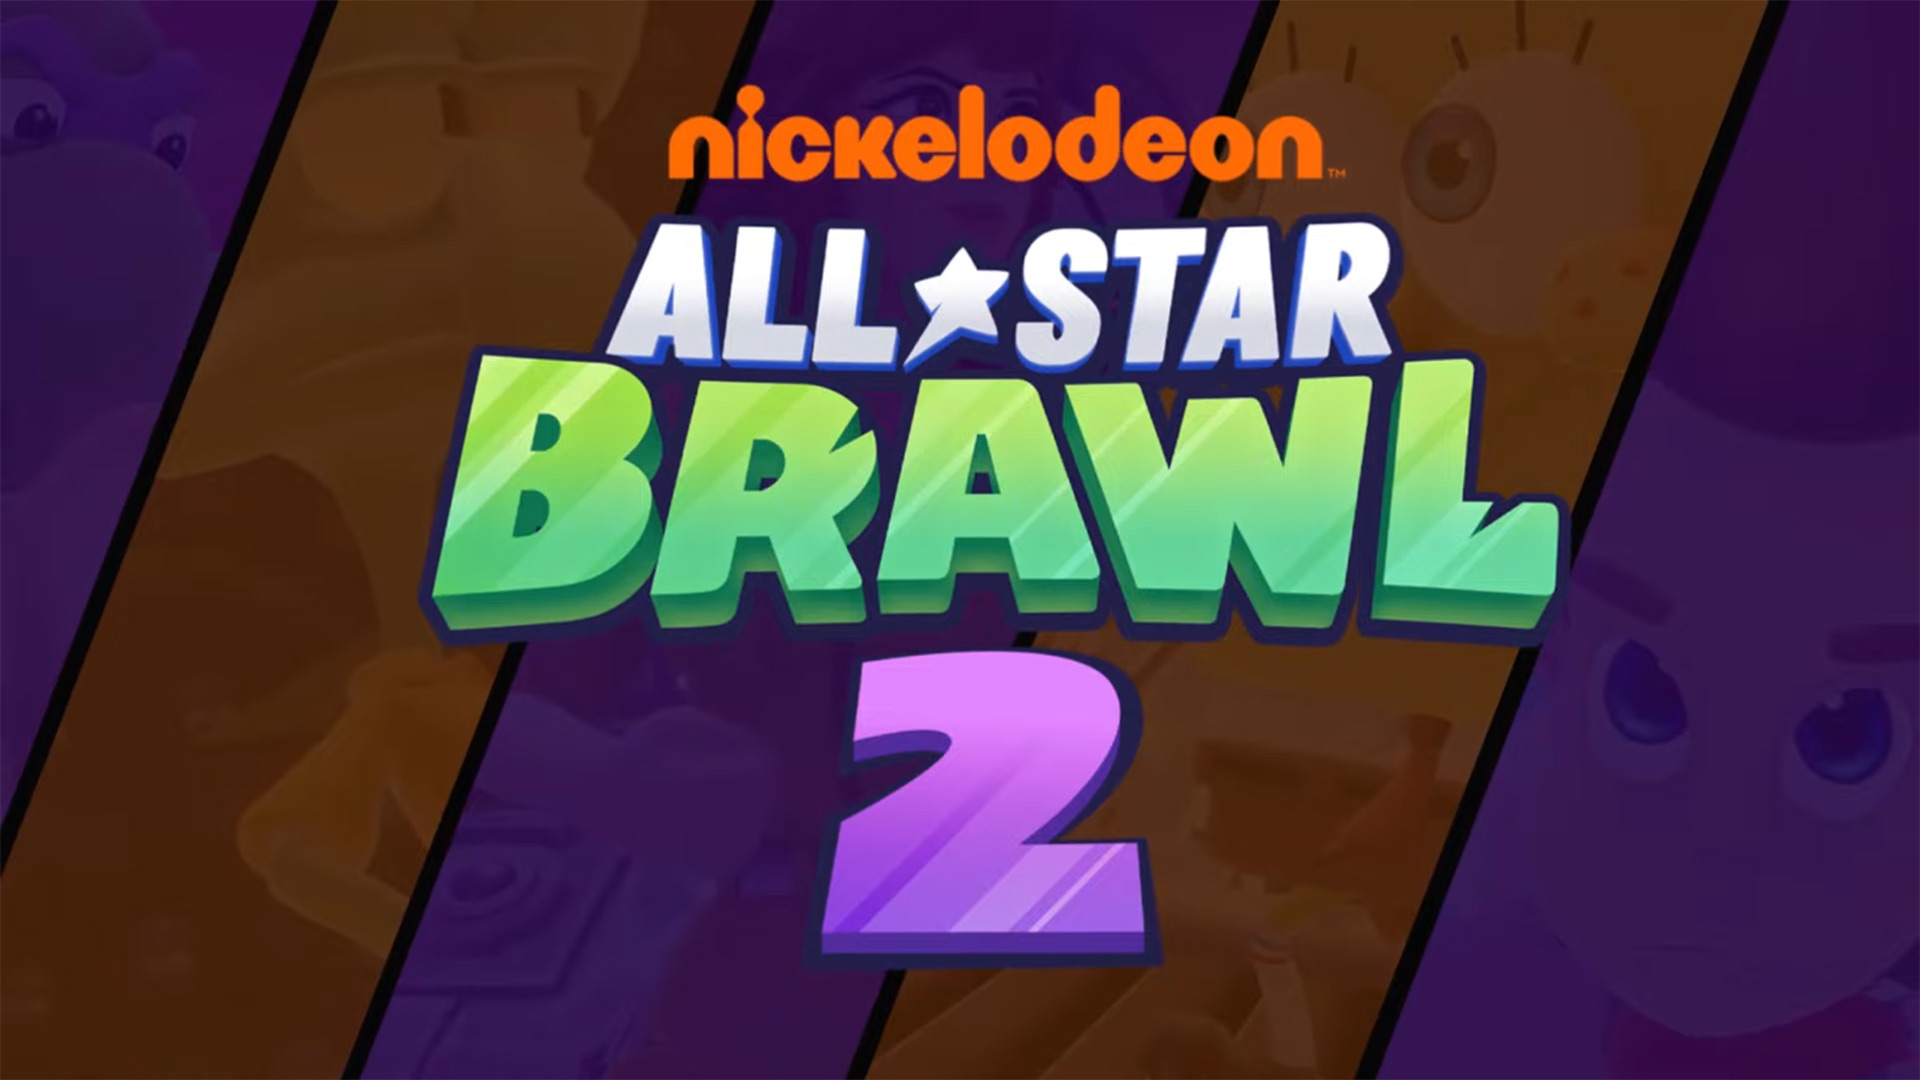 Nickelodeon All-Star Brawl 2 has been announced and is heading to all major consoles and PC